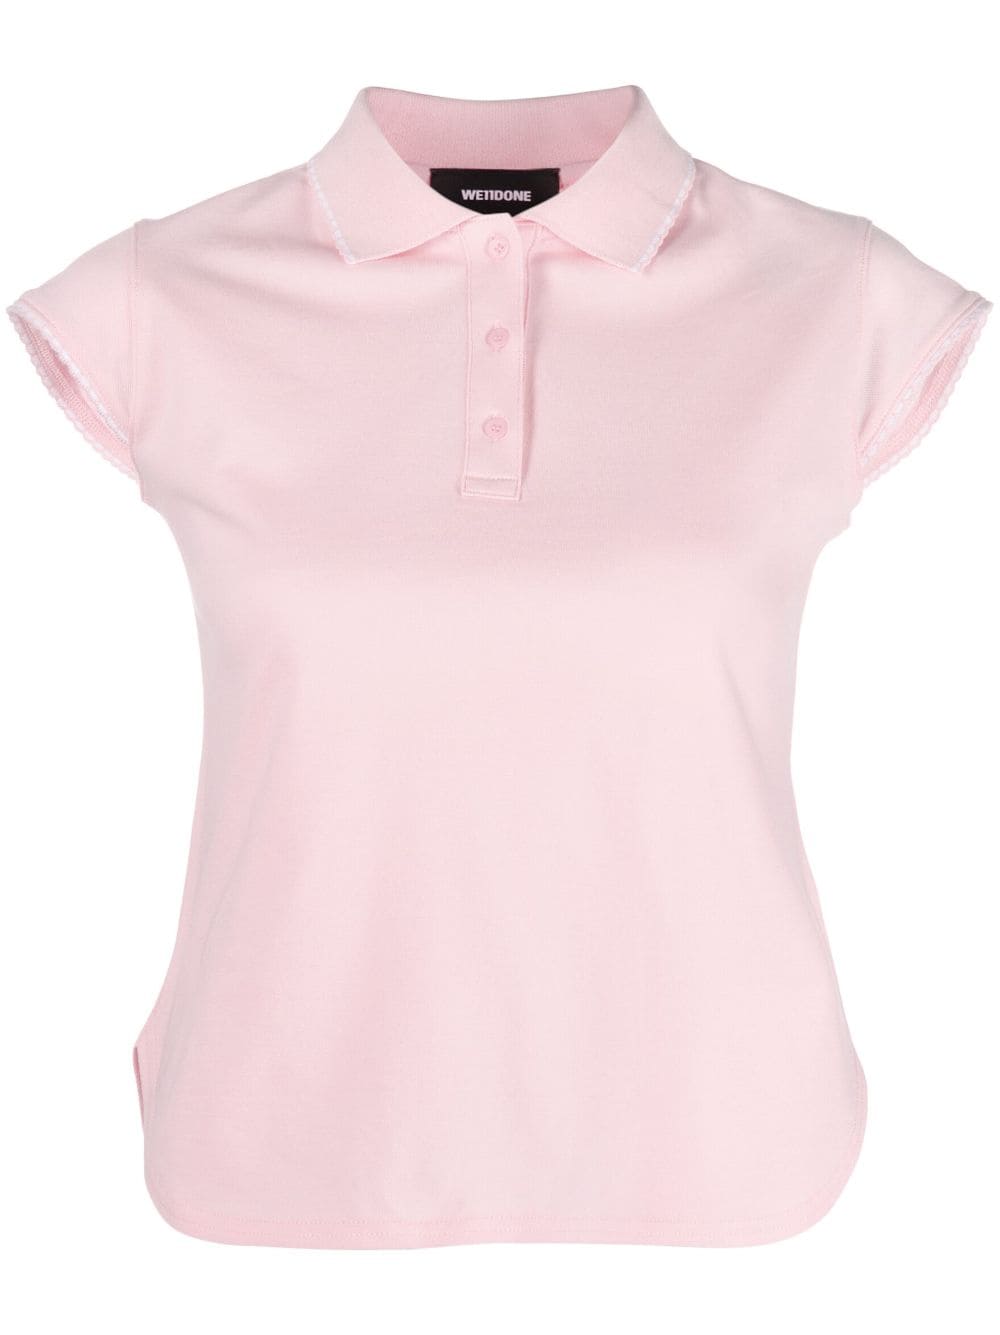 We11 Done Lace-trim Piqué Polo Top - Women's - Cotton In Pink